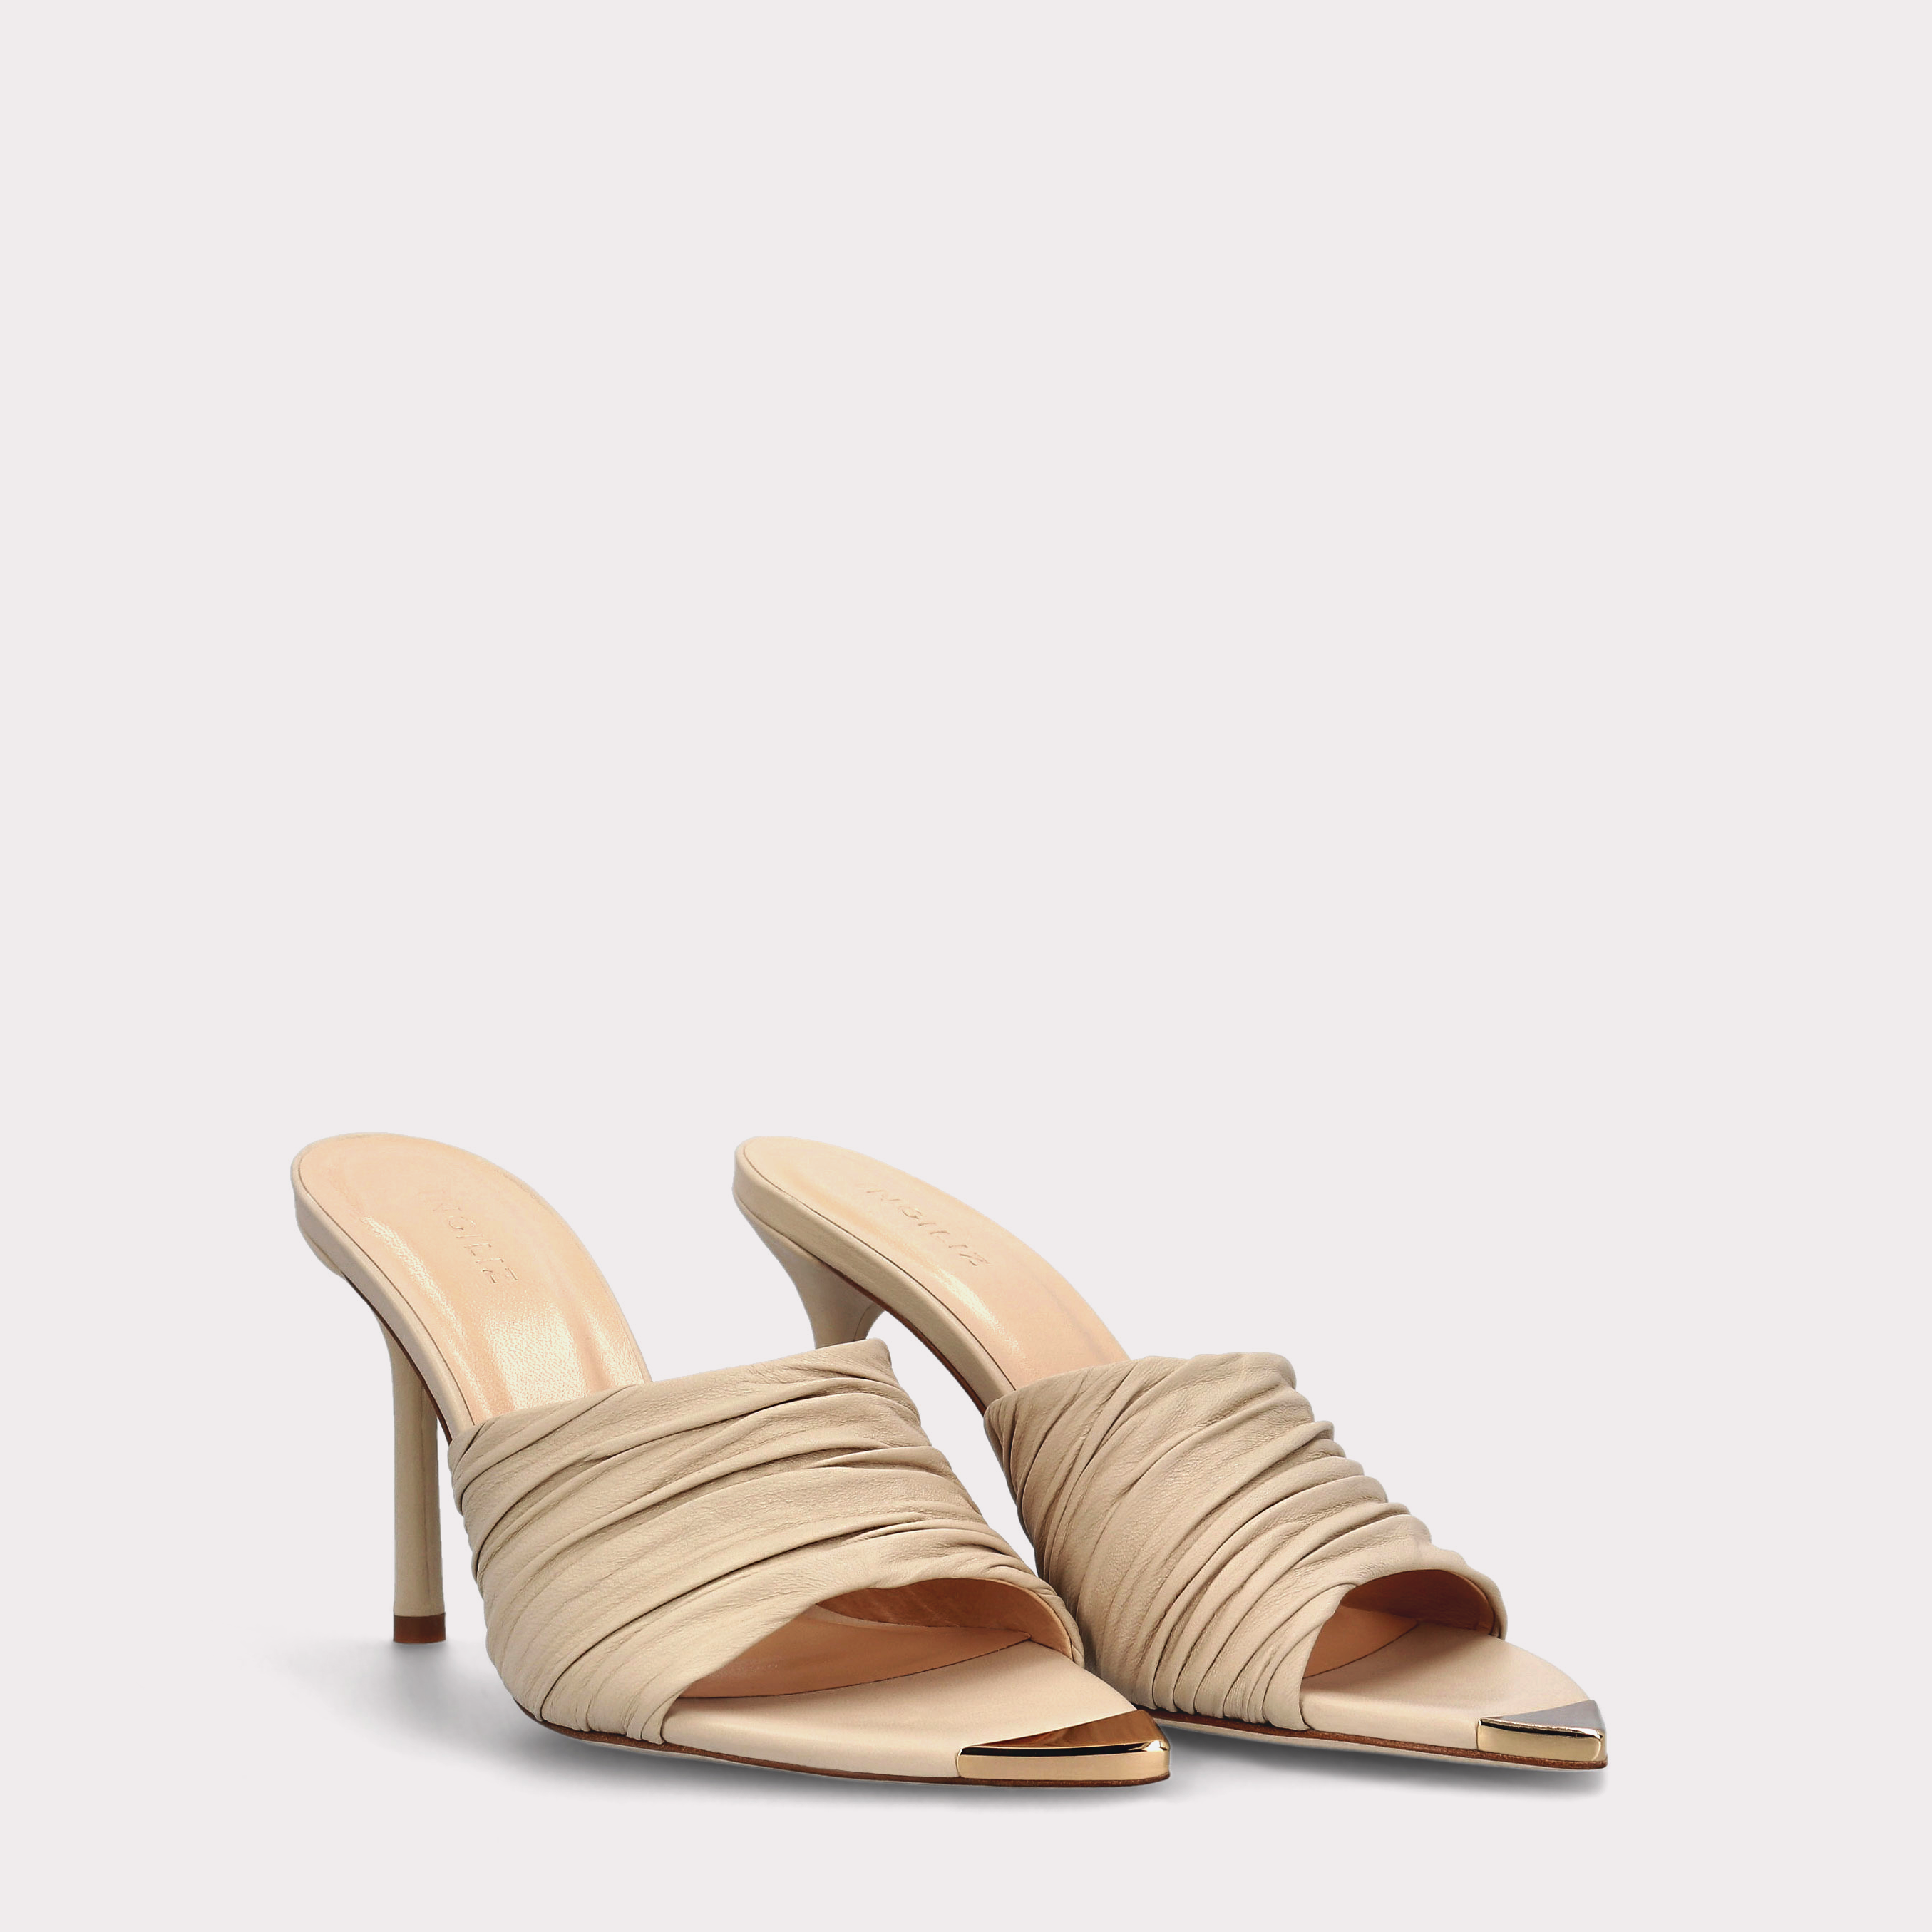 ANNY 03 IVORY LEATHER SANDALS